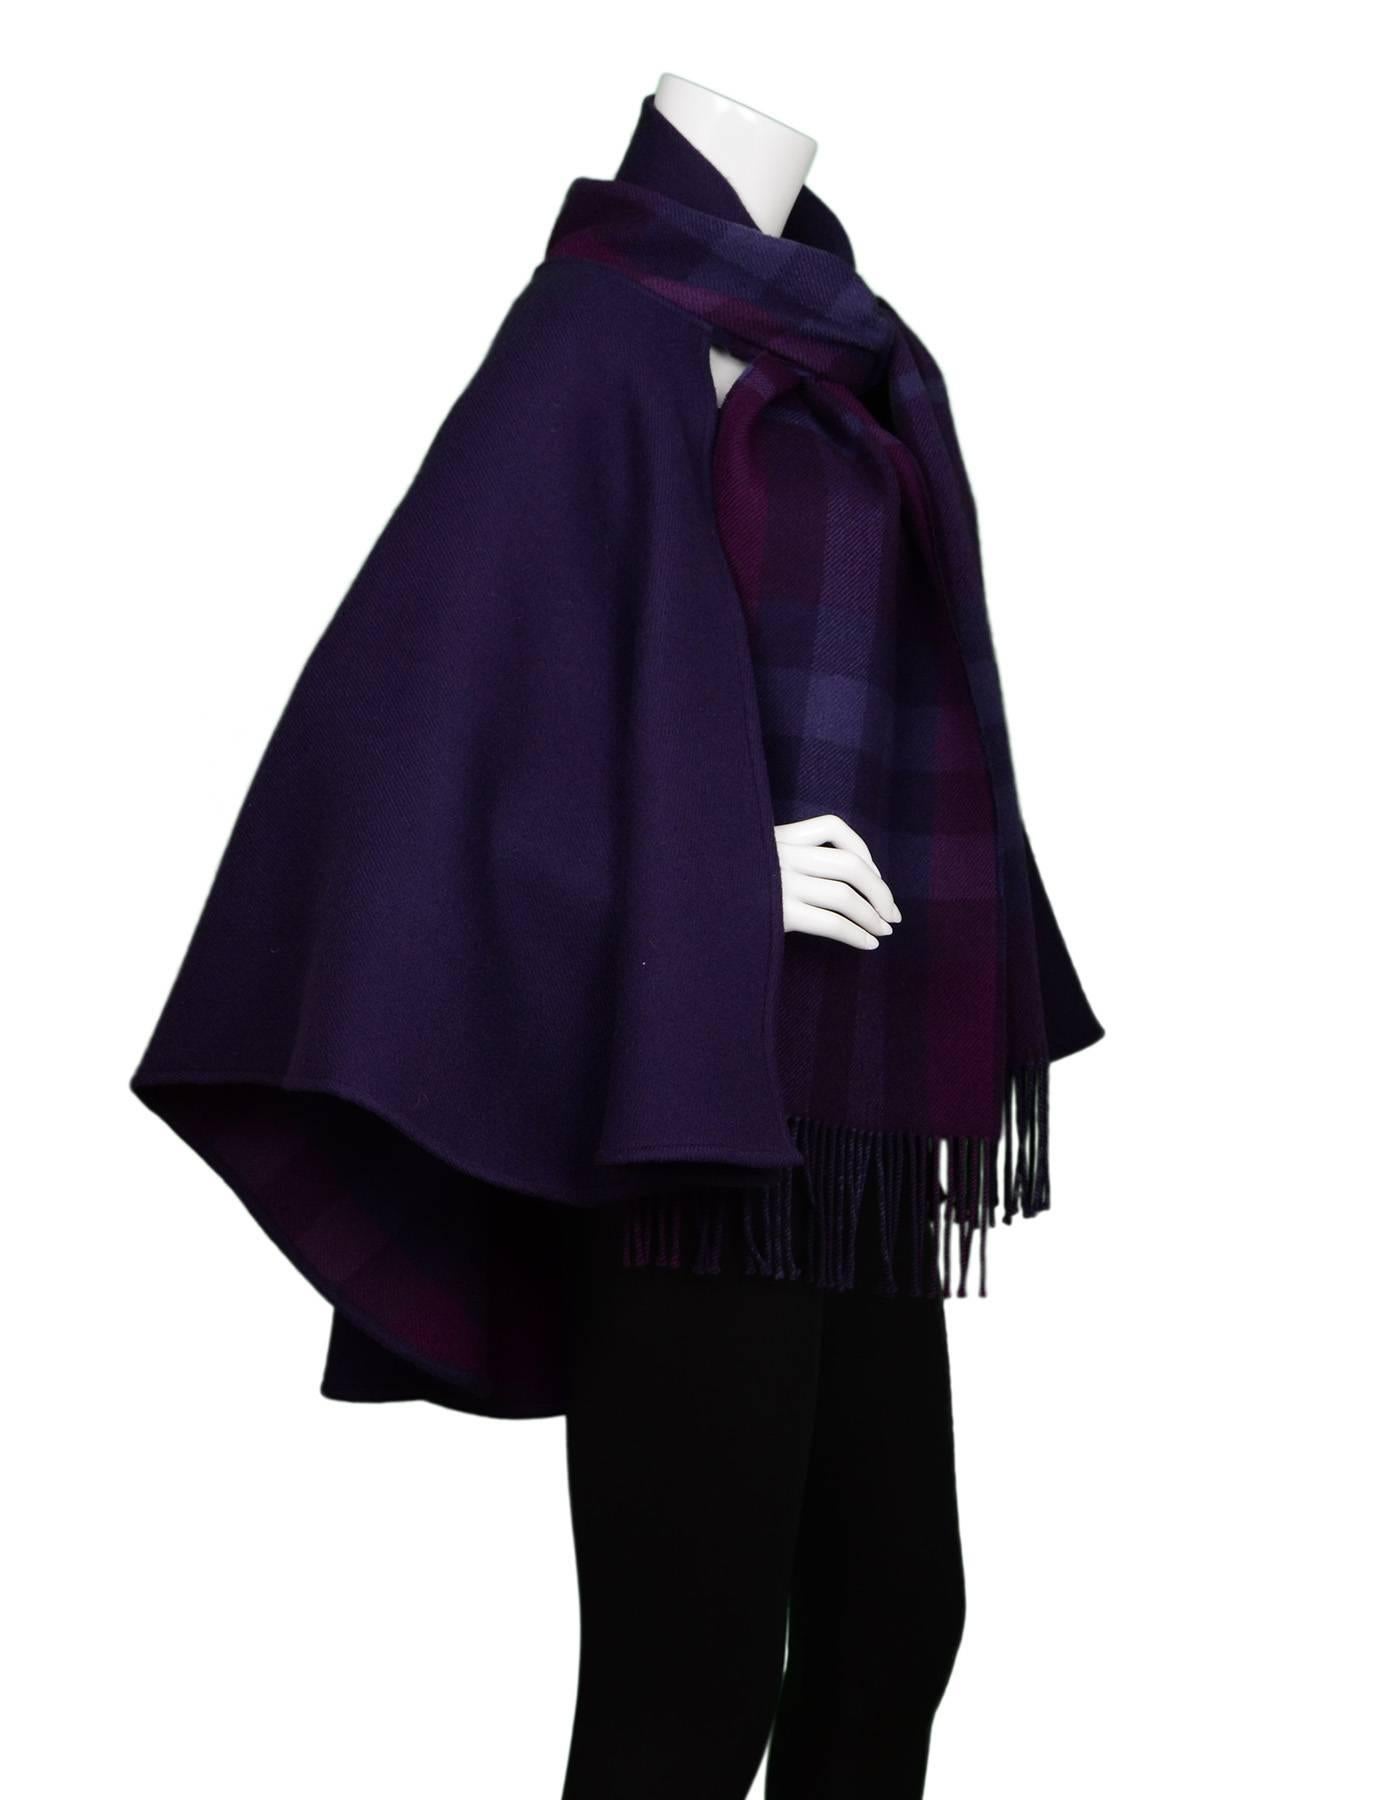 Burberry Purple & Nova Print Wool Cape 
Features attached fringe scarf

Color: Purple and magenta
Composition: Not given- believed to be a wool and cashmere-blend
Closure/Opening: None- can use scarf to tie at neckline
Overall Condition: